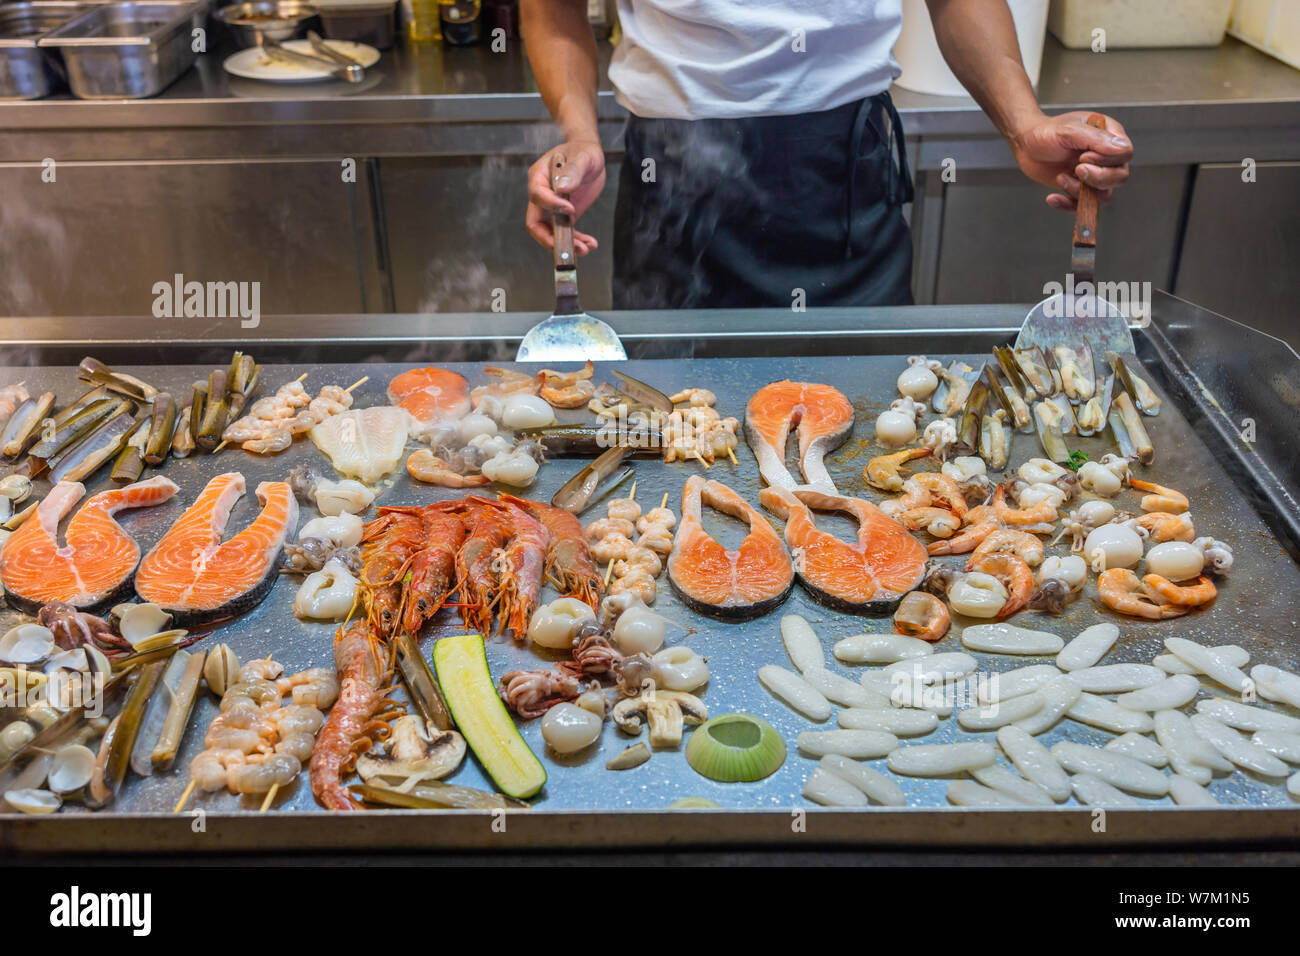 The restaurant's chef cooking seafoods on big square pan in kitchen Stock Photo